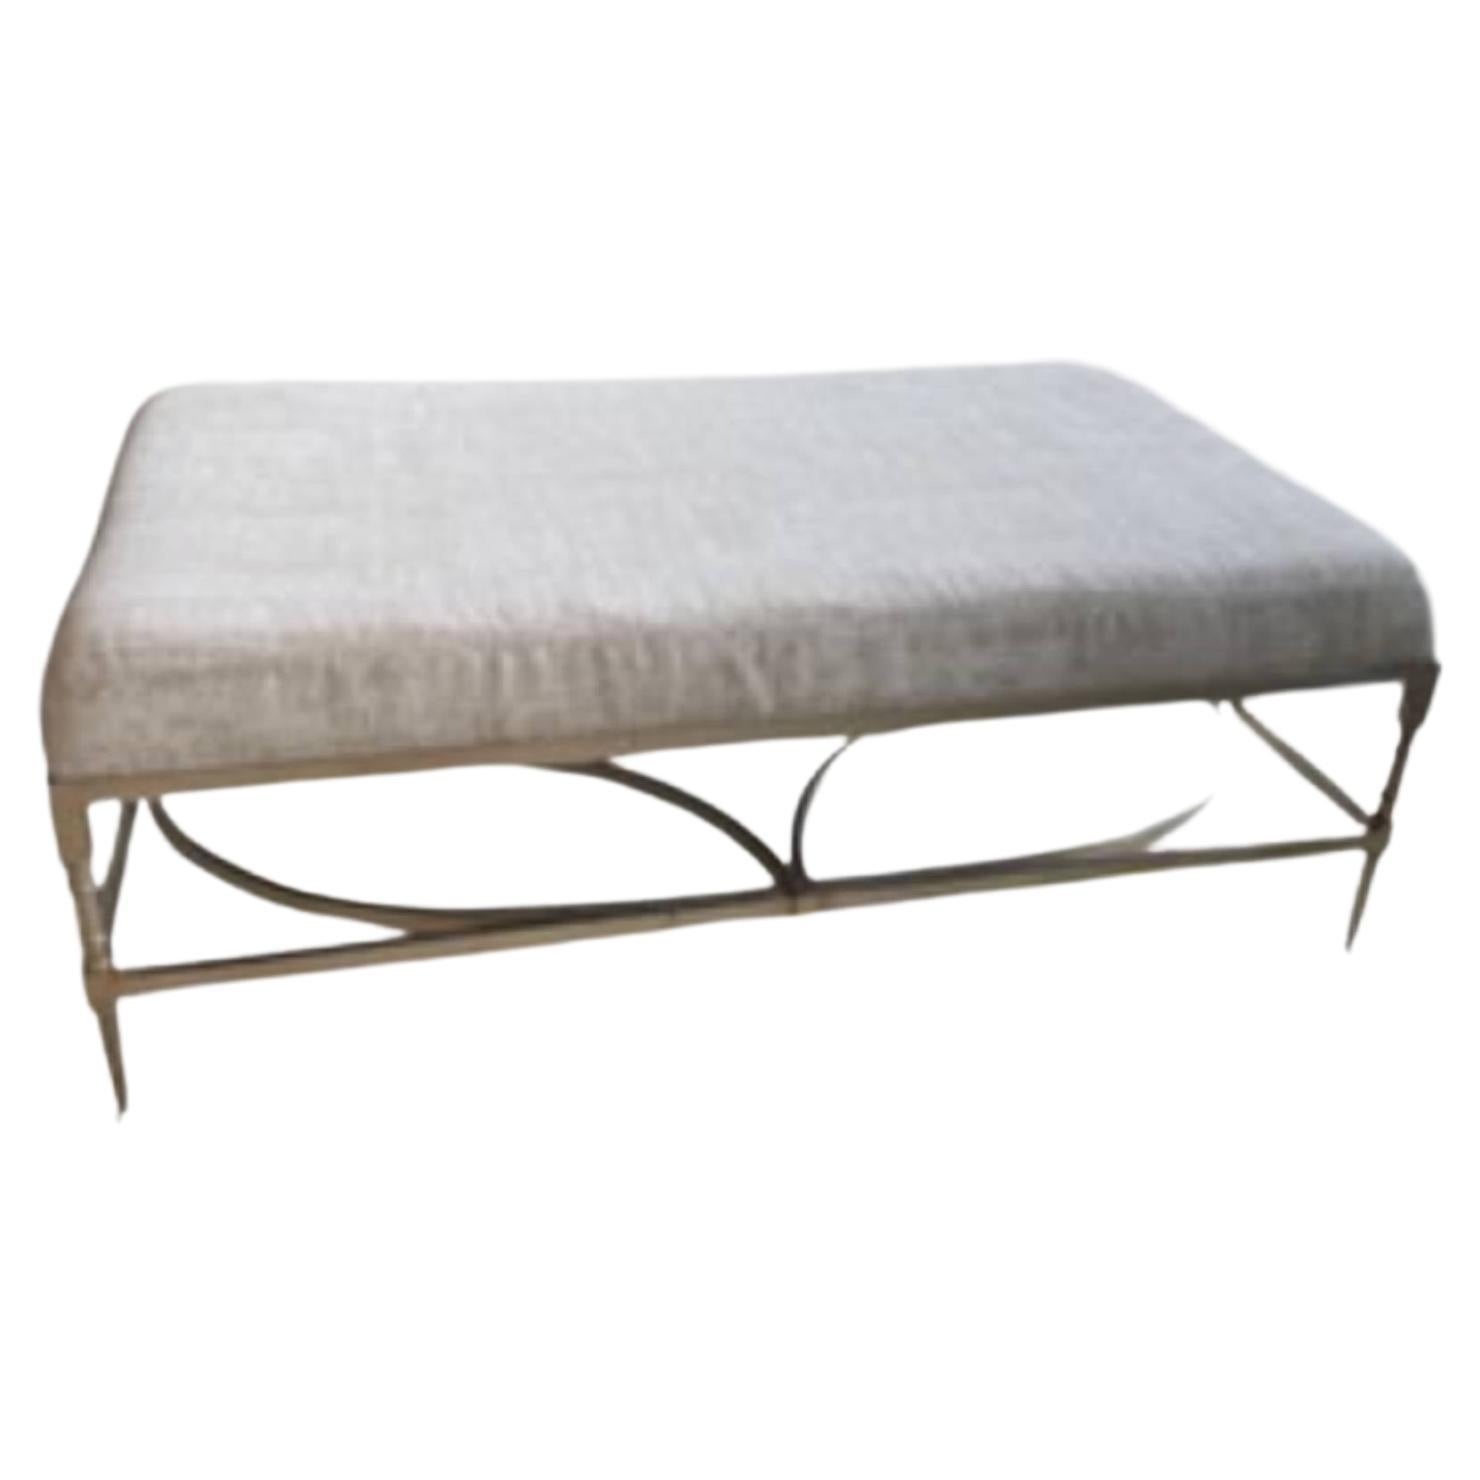 Upholstered Coffee Table with Nickel Base